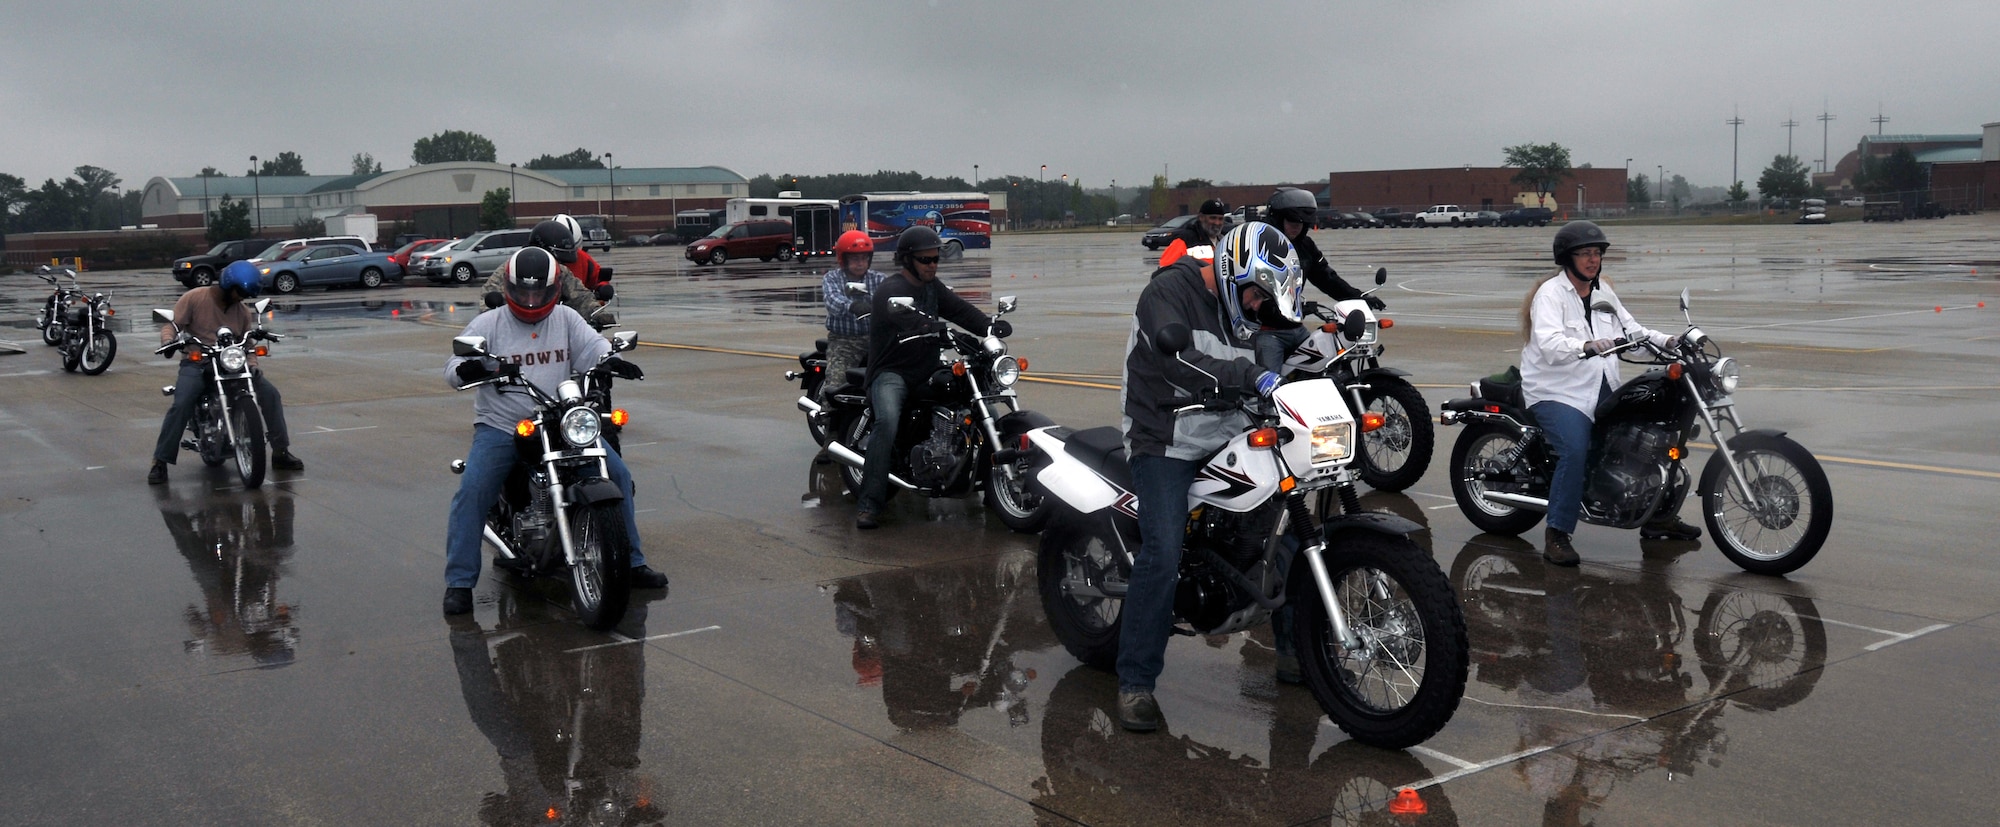 Nine motorcycle riders participate in a Motorcycle Ohio safety course at Springfield Air National Guard Base, Ohio, for military members and retirees July 20 to enhance motorcycle skills, safety and awareness. The class titled Basic Rider Course is ran by the Ohio Department of Public Safety and teaches fundamental skills ranging from basic familiarization to hazard avoidance while riding a motorcycle. (U.S. Air Force photo by 2nd Lt. Michael Gibson)